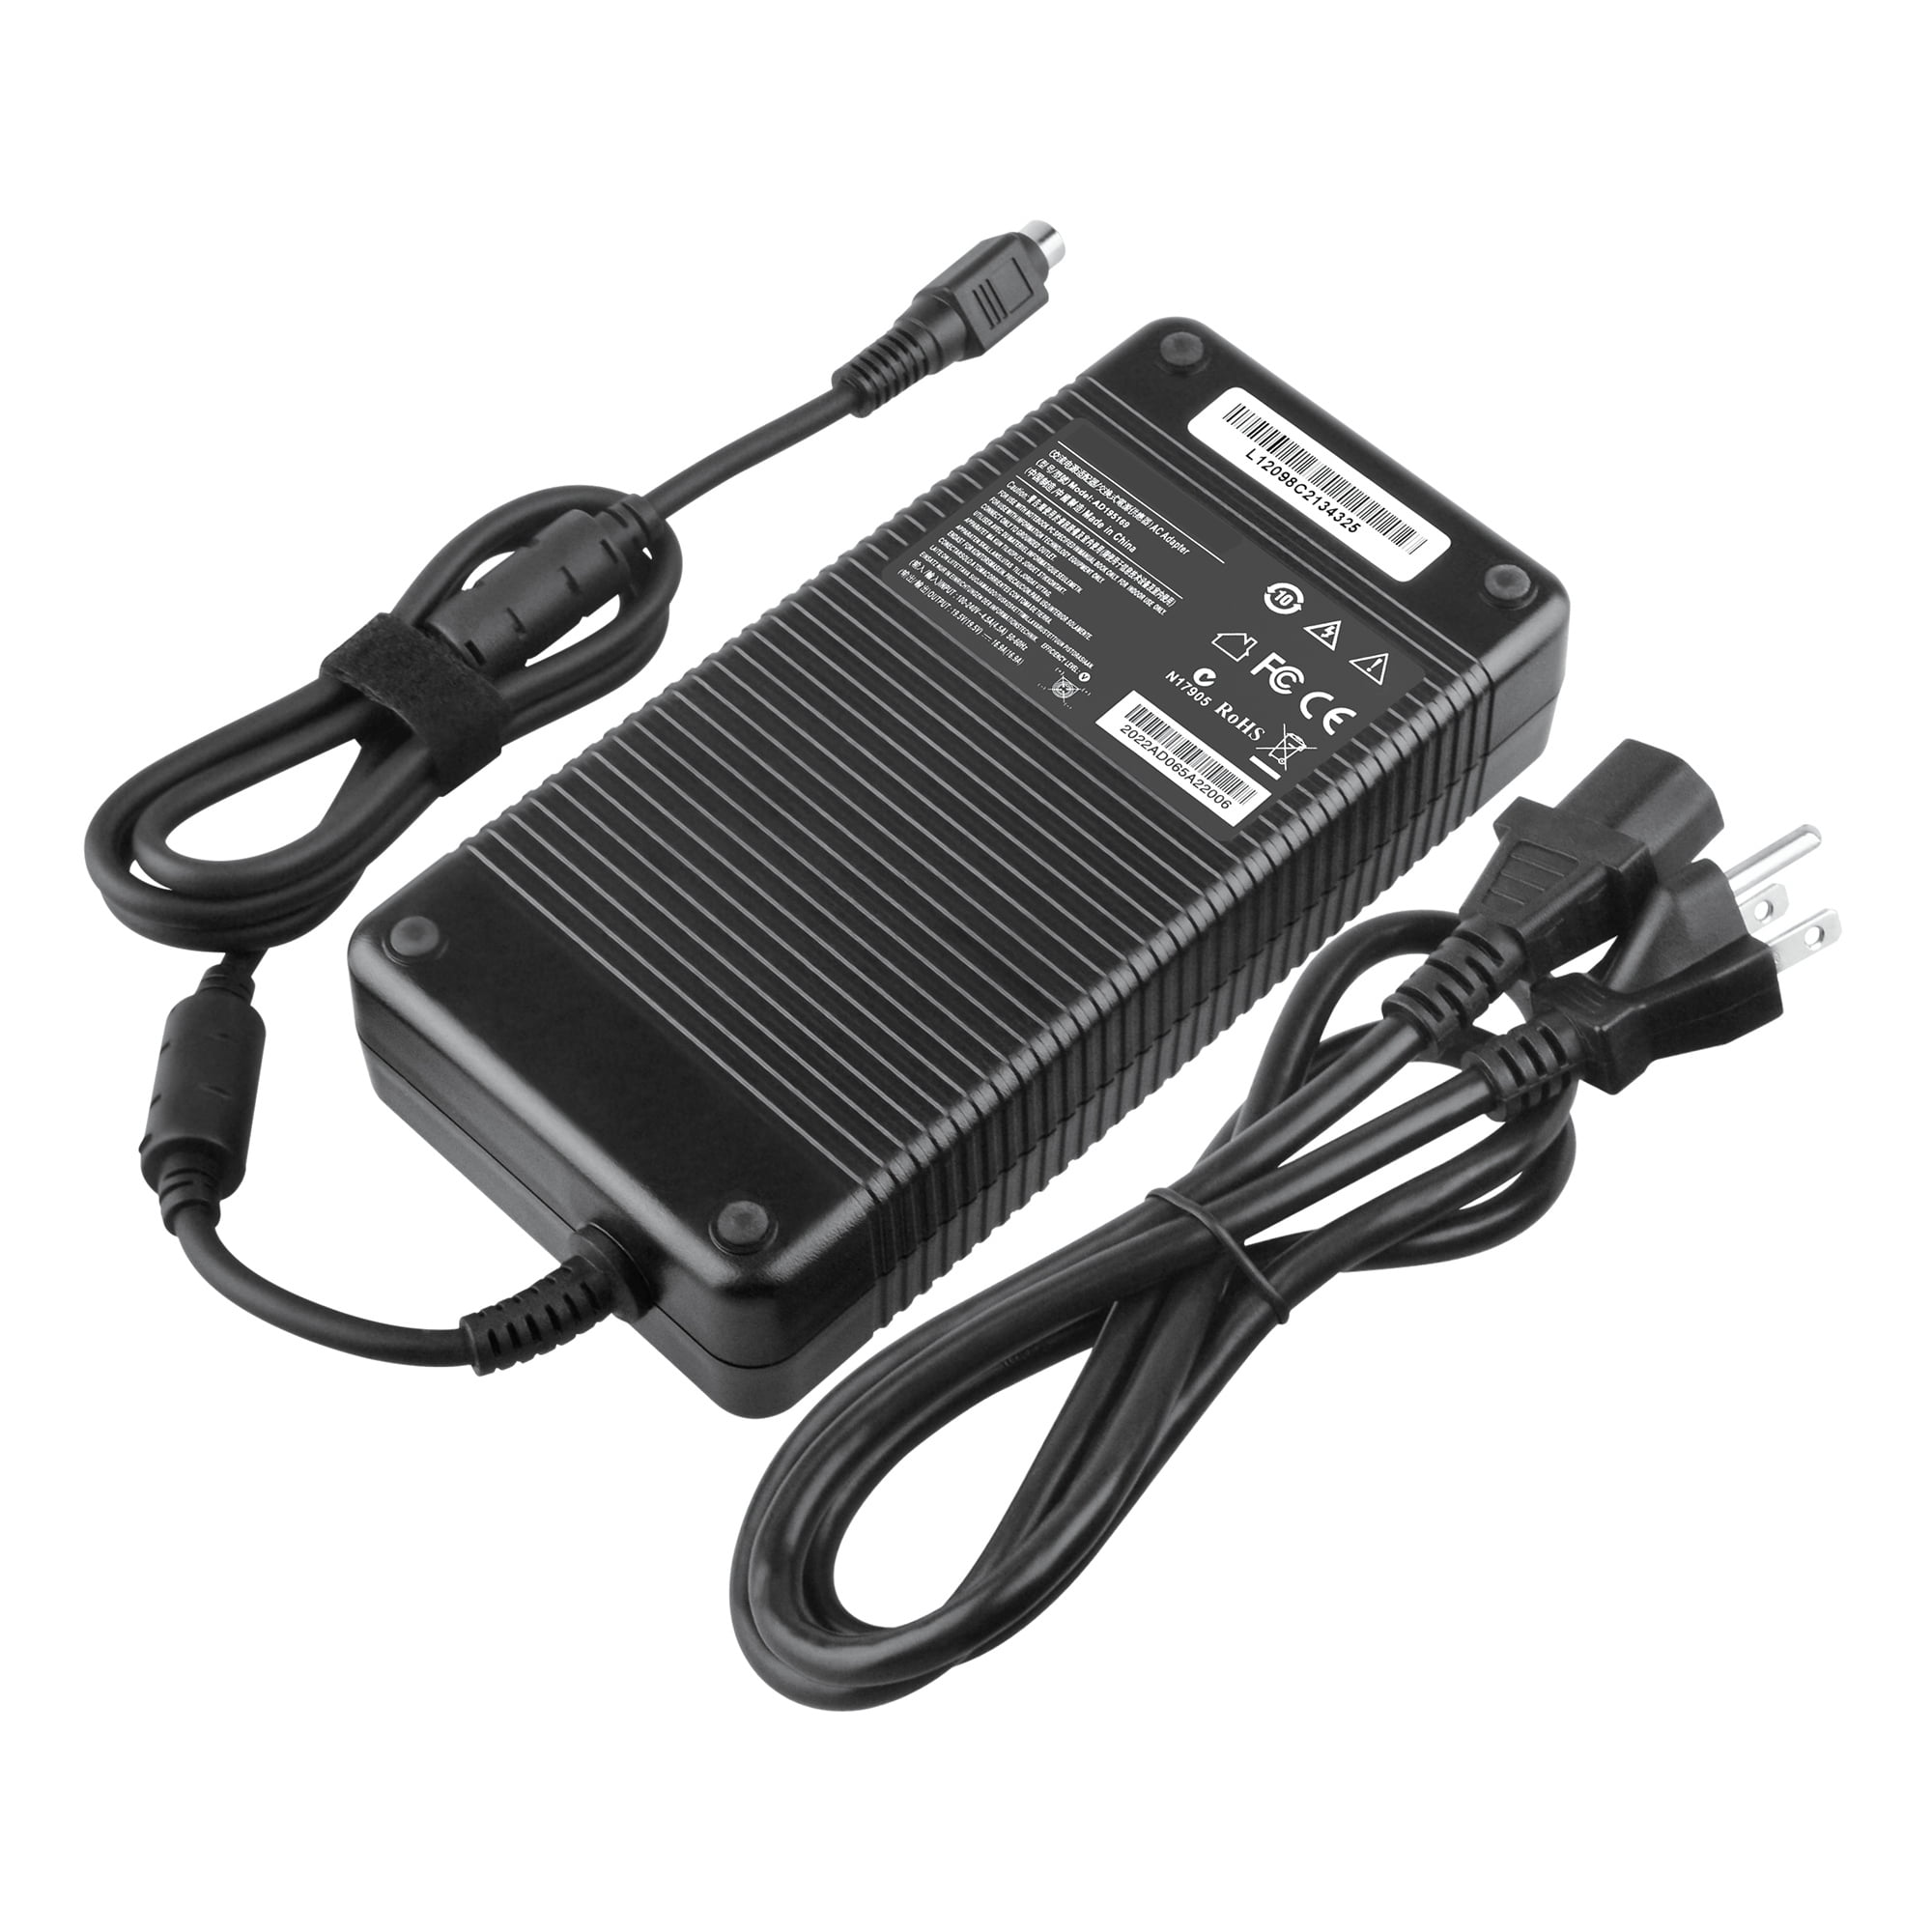 Charger 40V,1A, 2,5h, 49,99 €